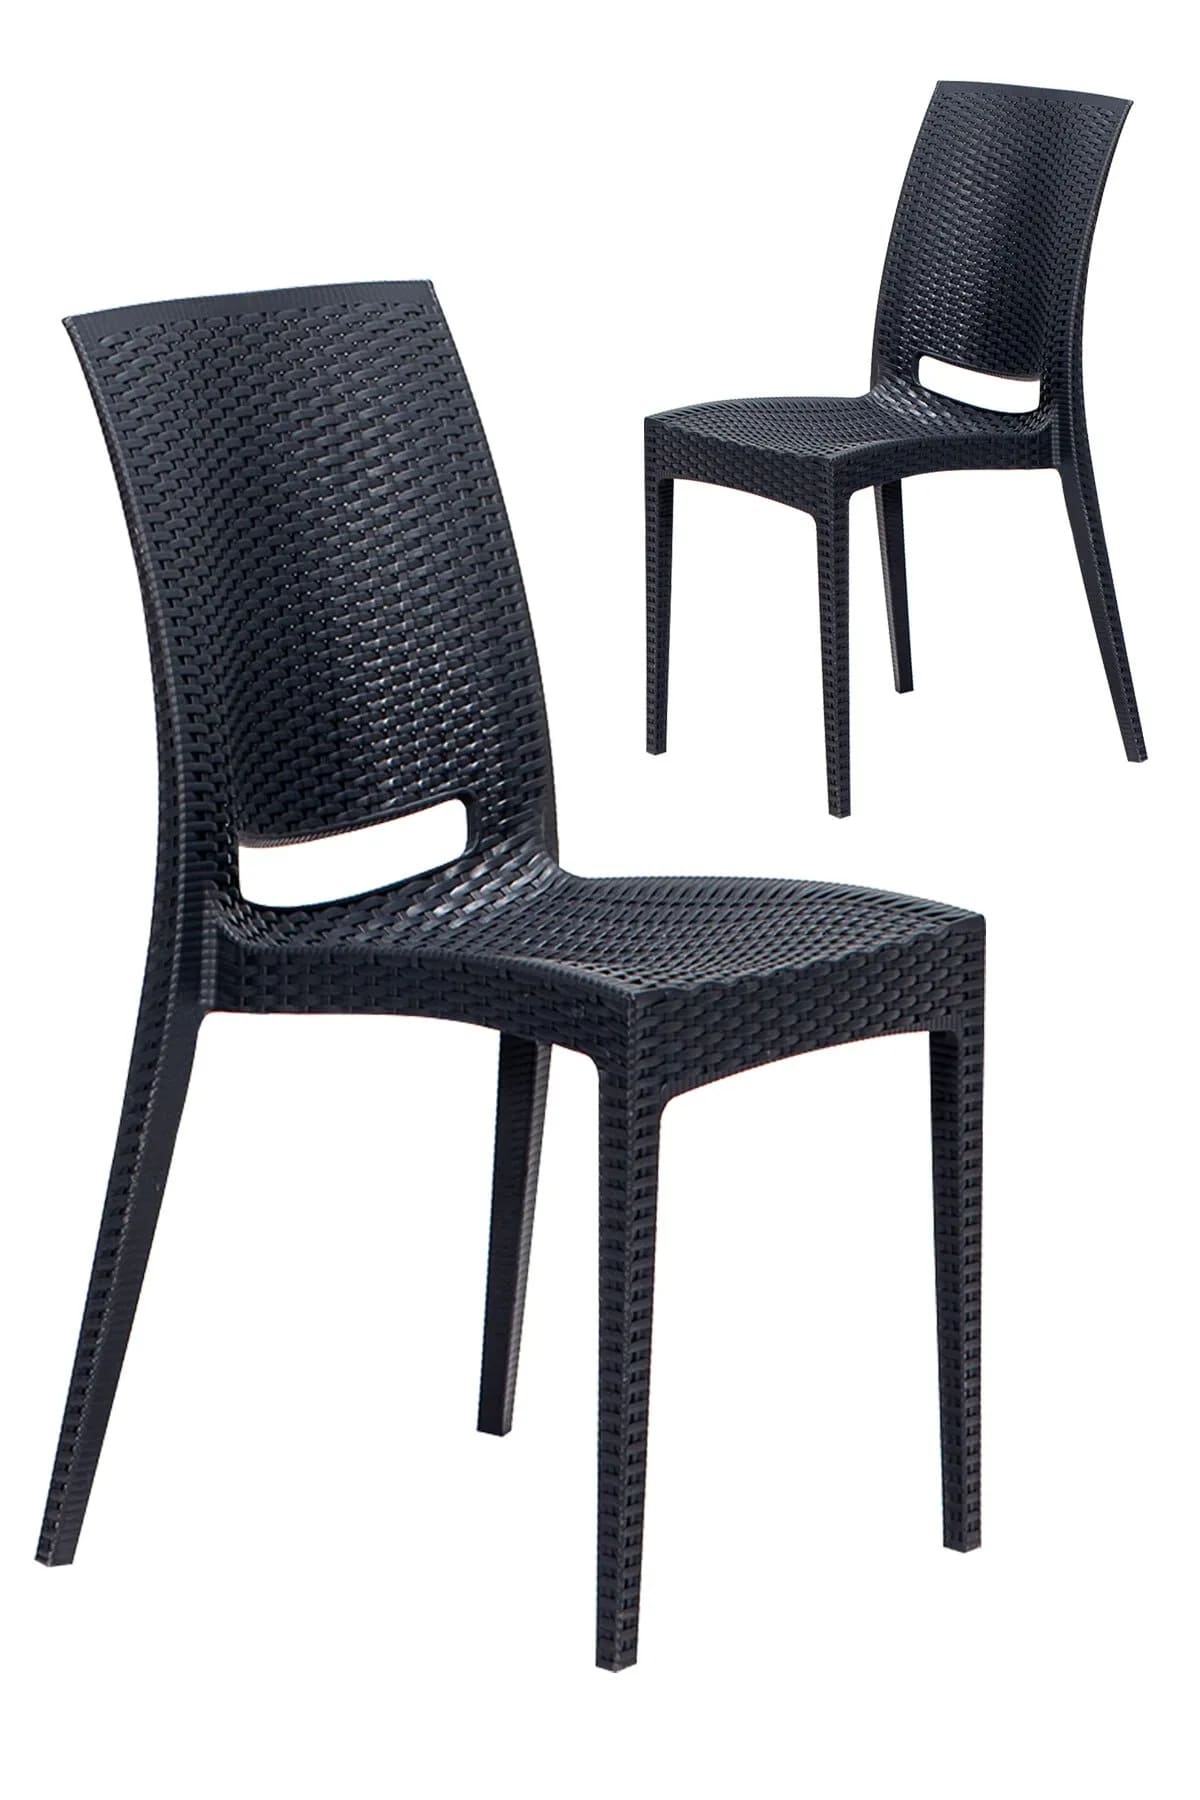 2 Pieces Rattan Anthracite Chairs / Balcony-Garden-Terrace